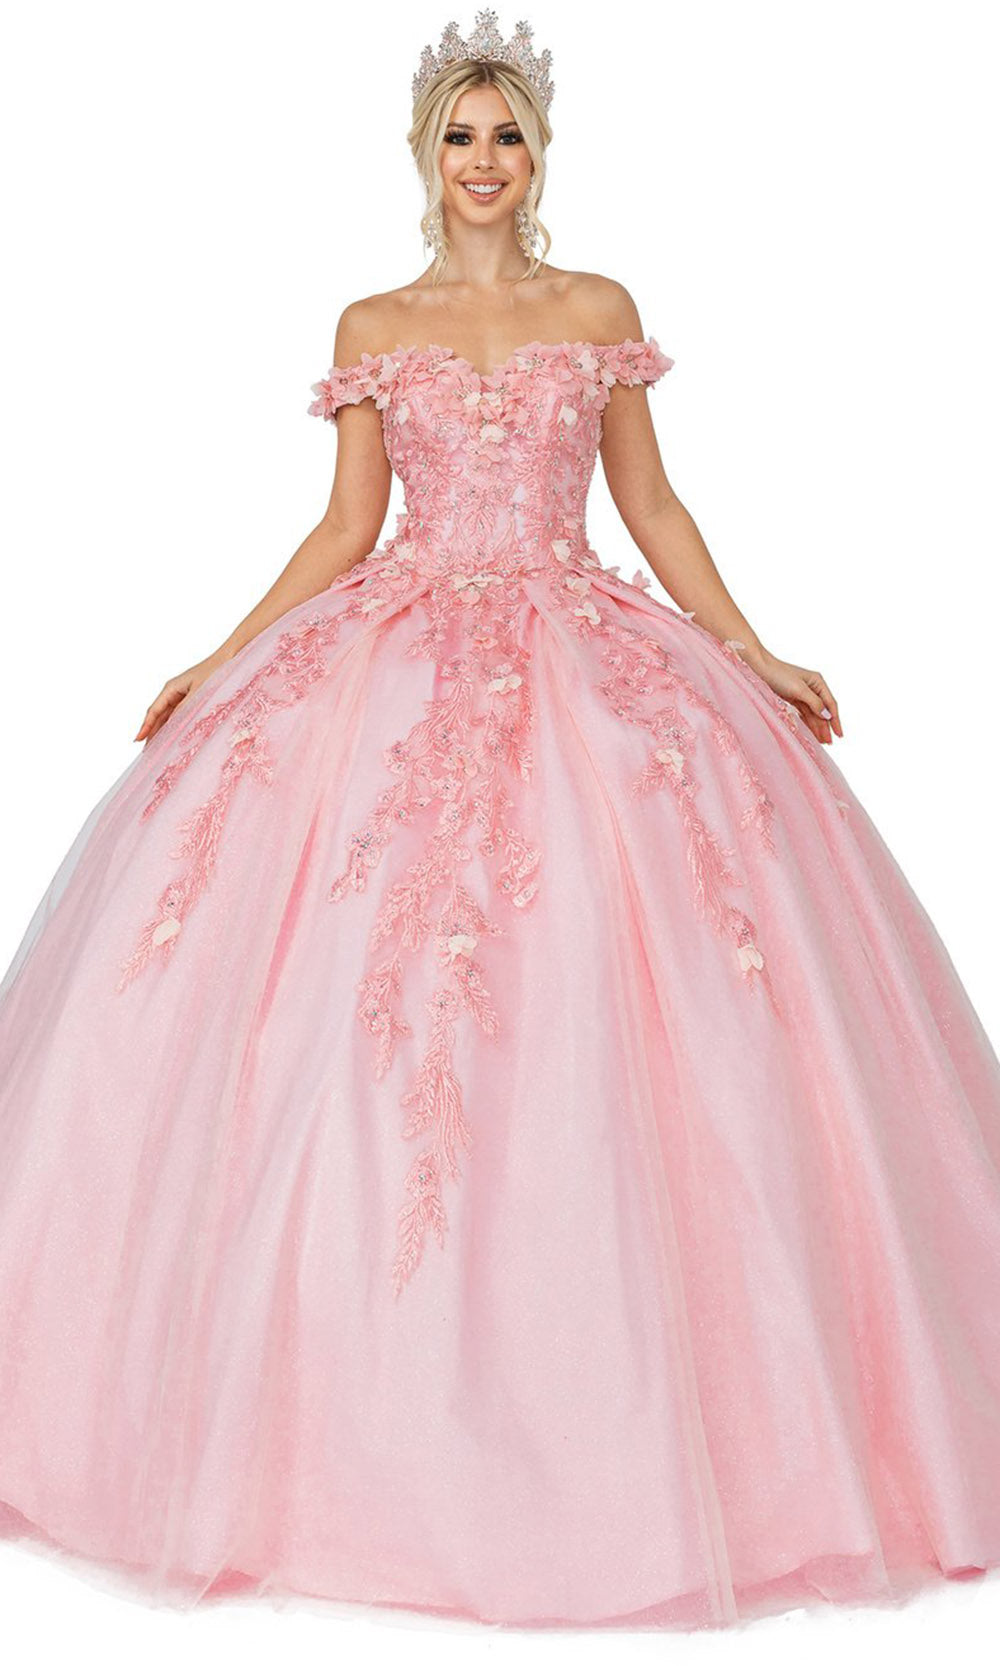 Dancing Queen - 1620 Floral Applique Glittered Ballgown In Pink